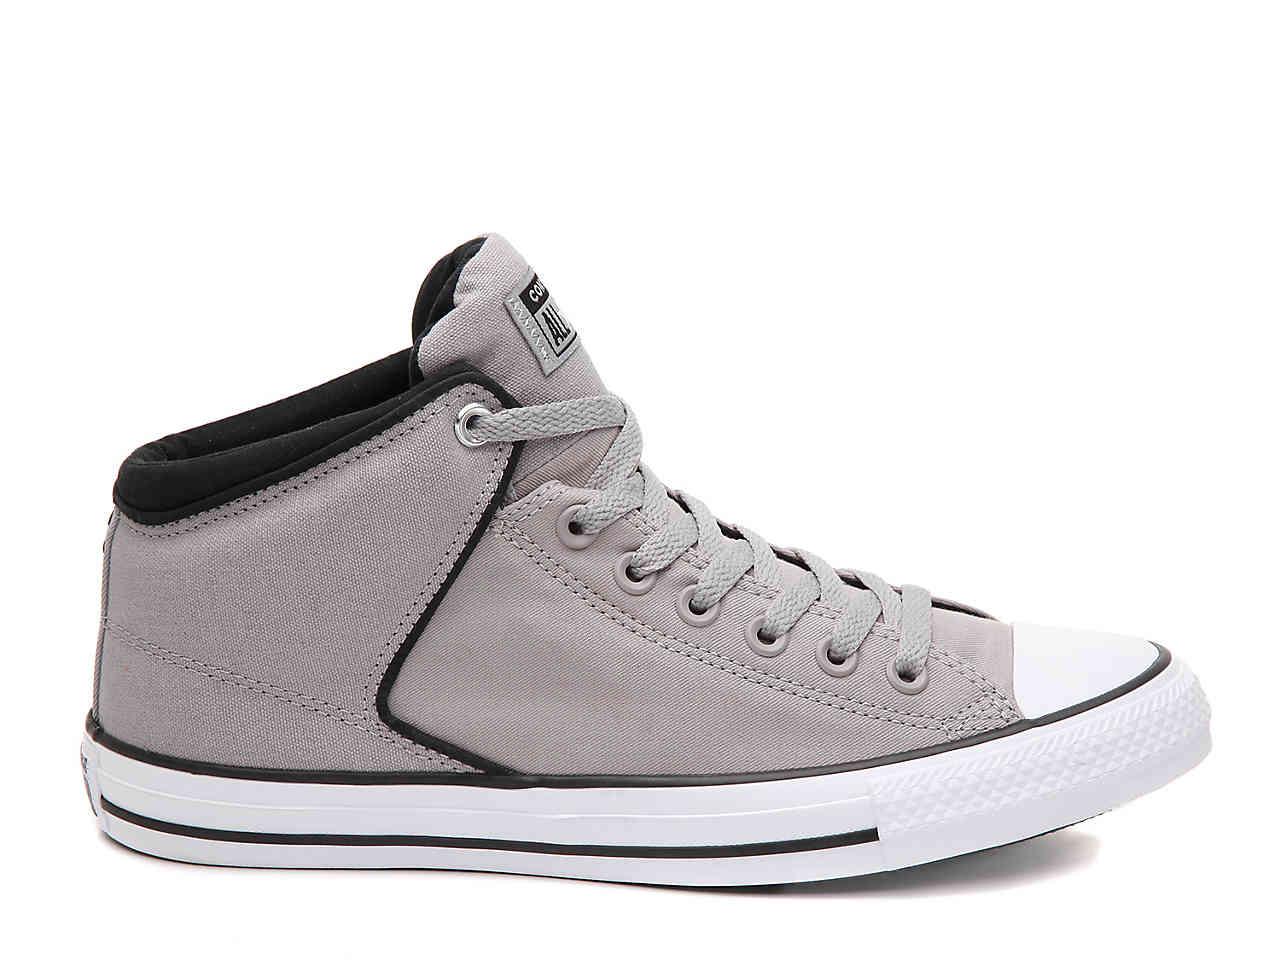 Converse Canvas Chuck Taylor All Star Street Mid-top Sneaker in Grey ...